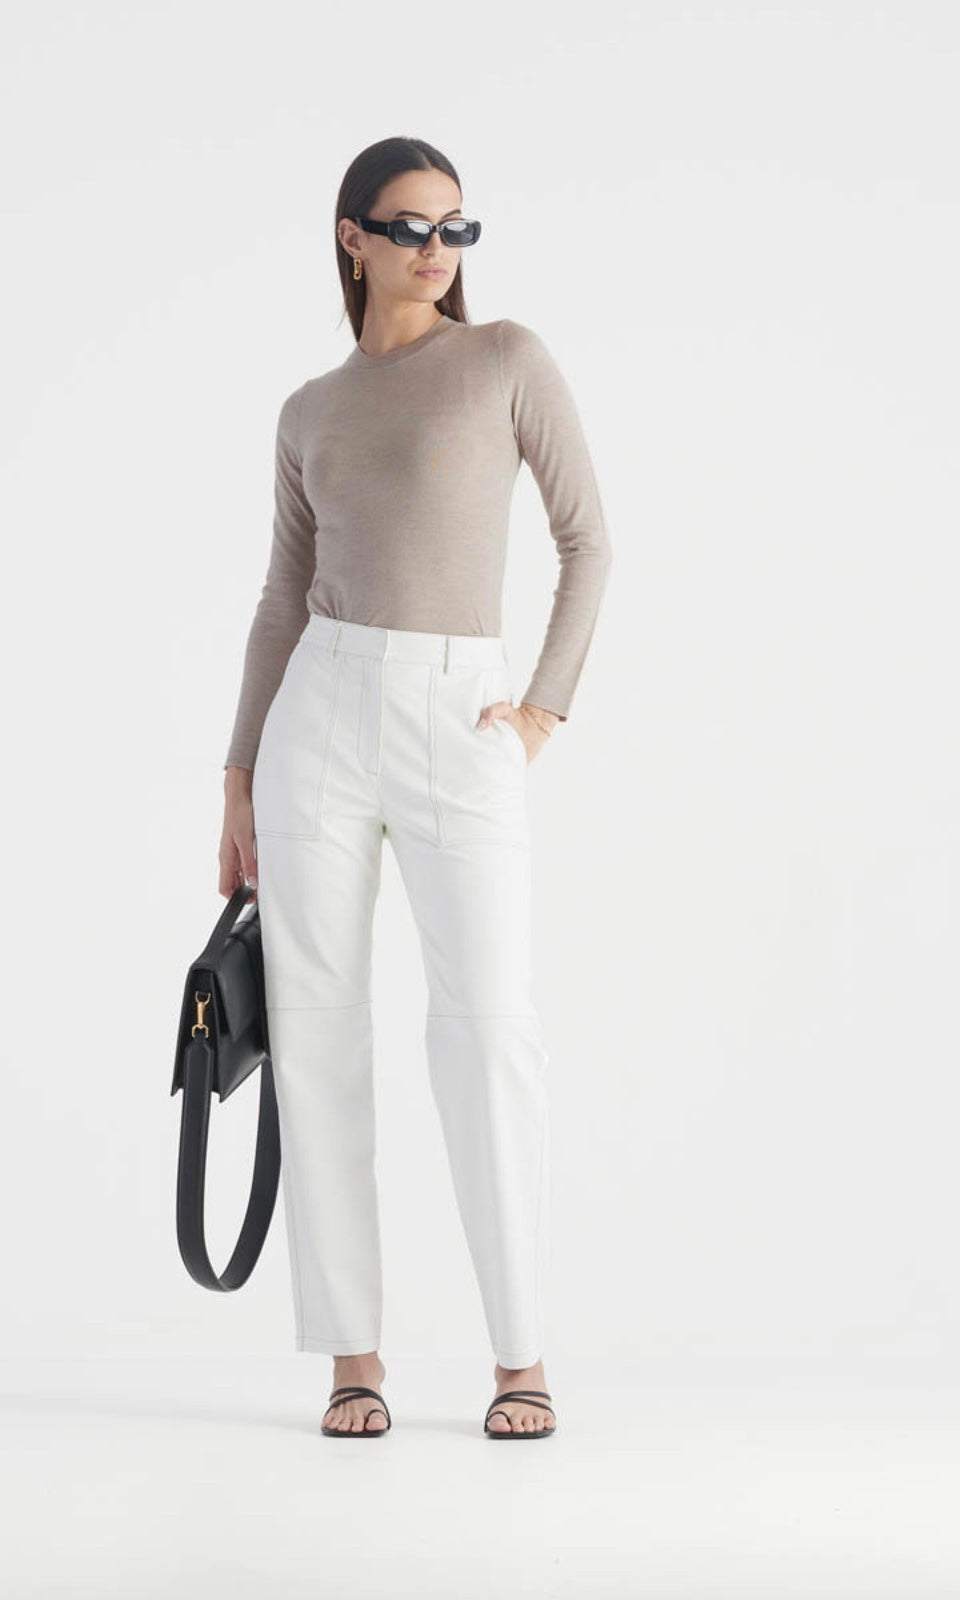 Elka Collective Ginny Knit Top In Taupe